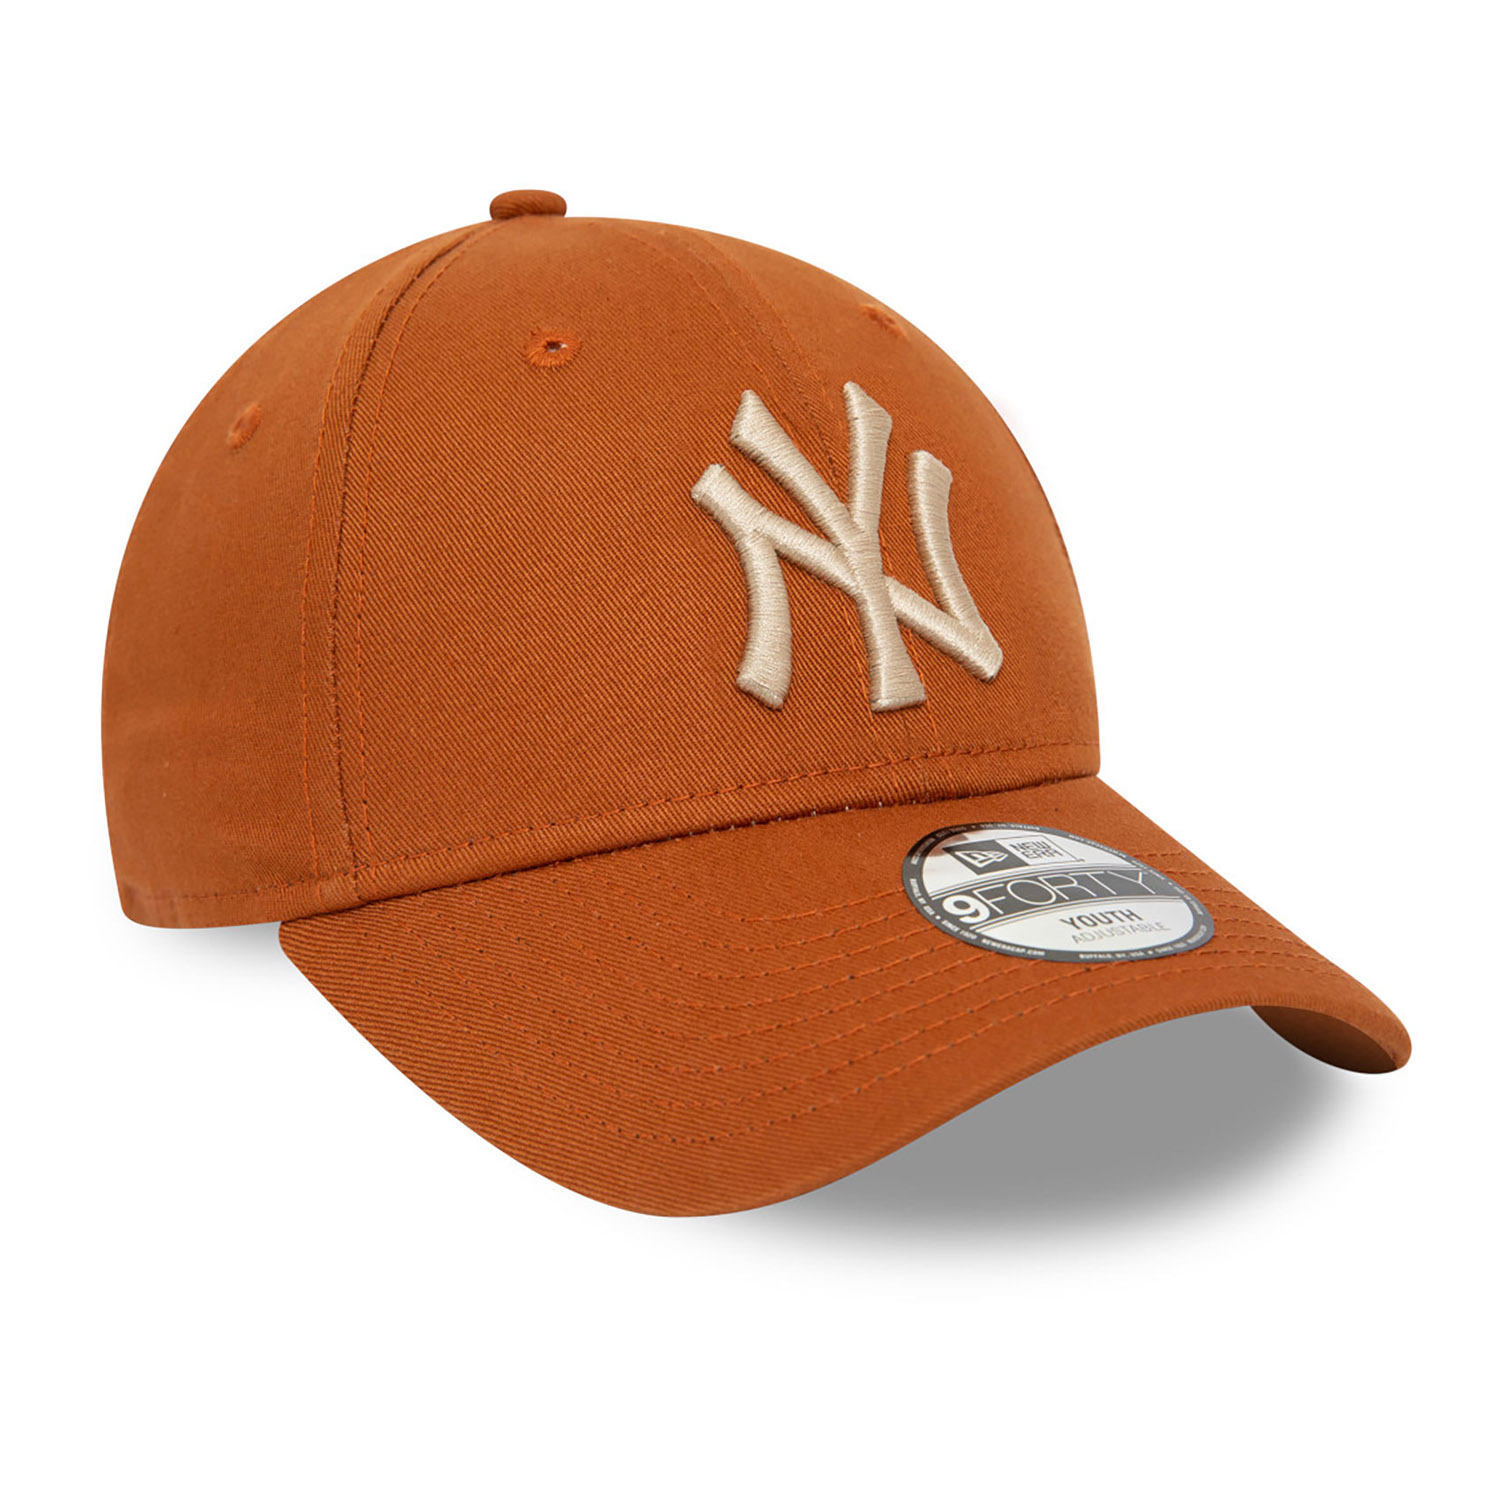 New York Yankees Youth League Essential Brown 9FORTY Adjustable Cap